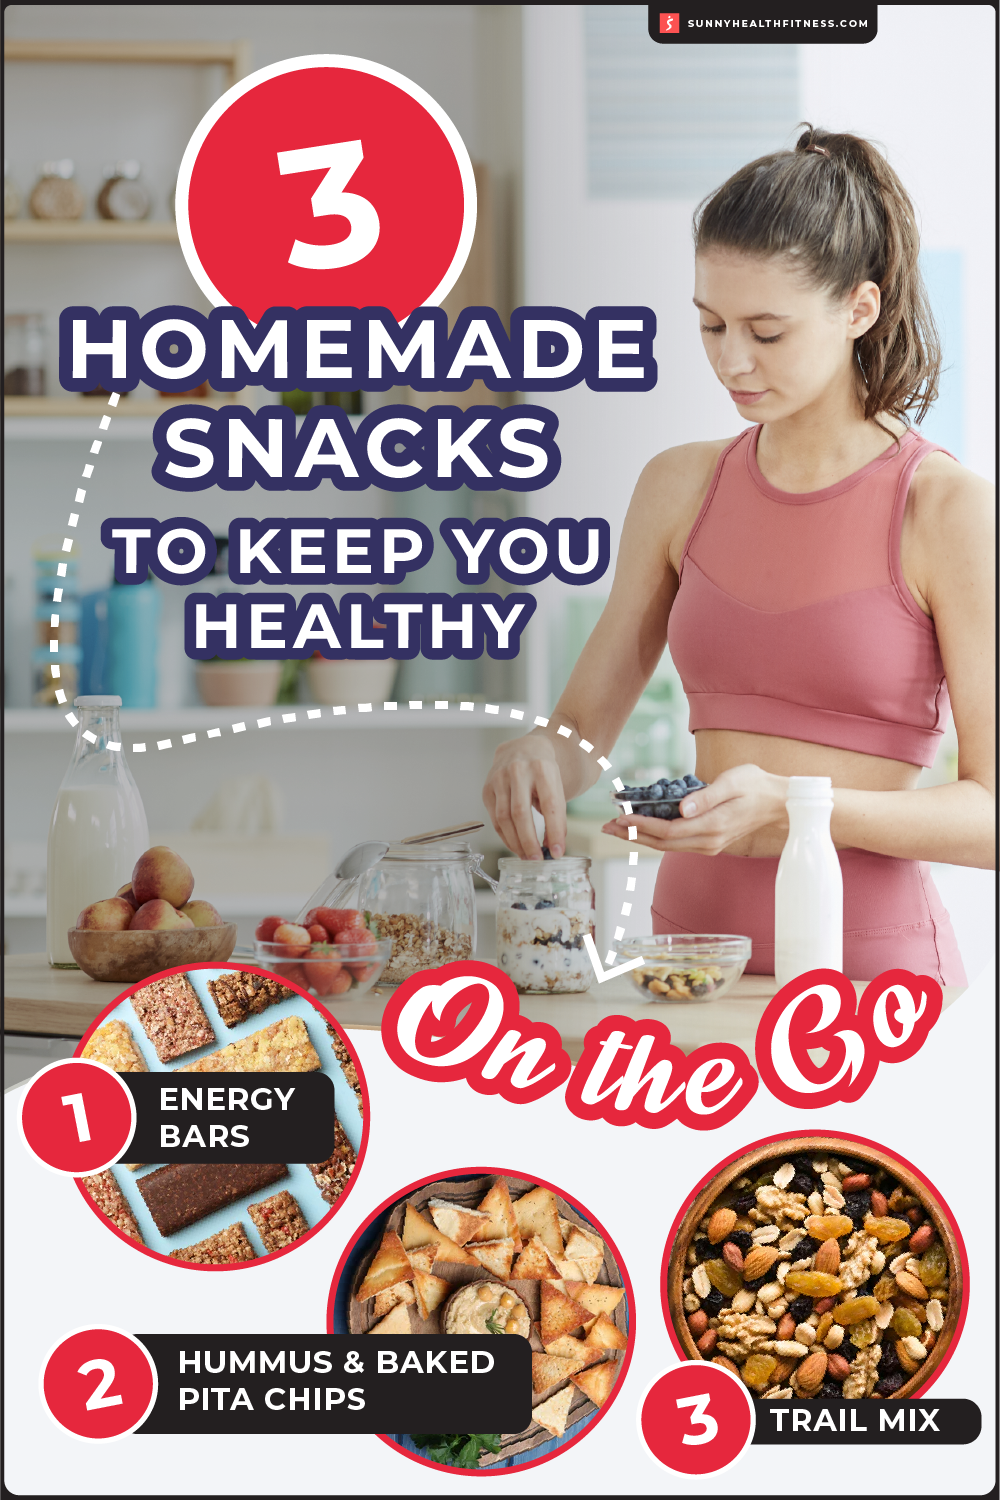 Homemade Healthy Snacks Infographic